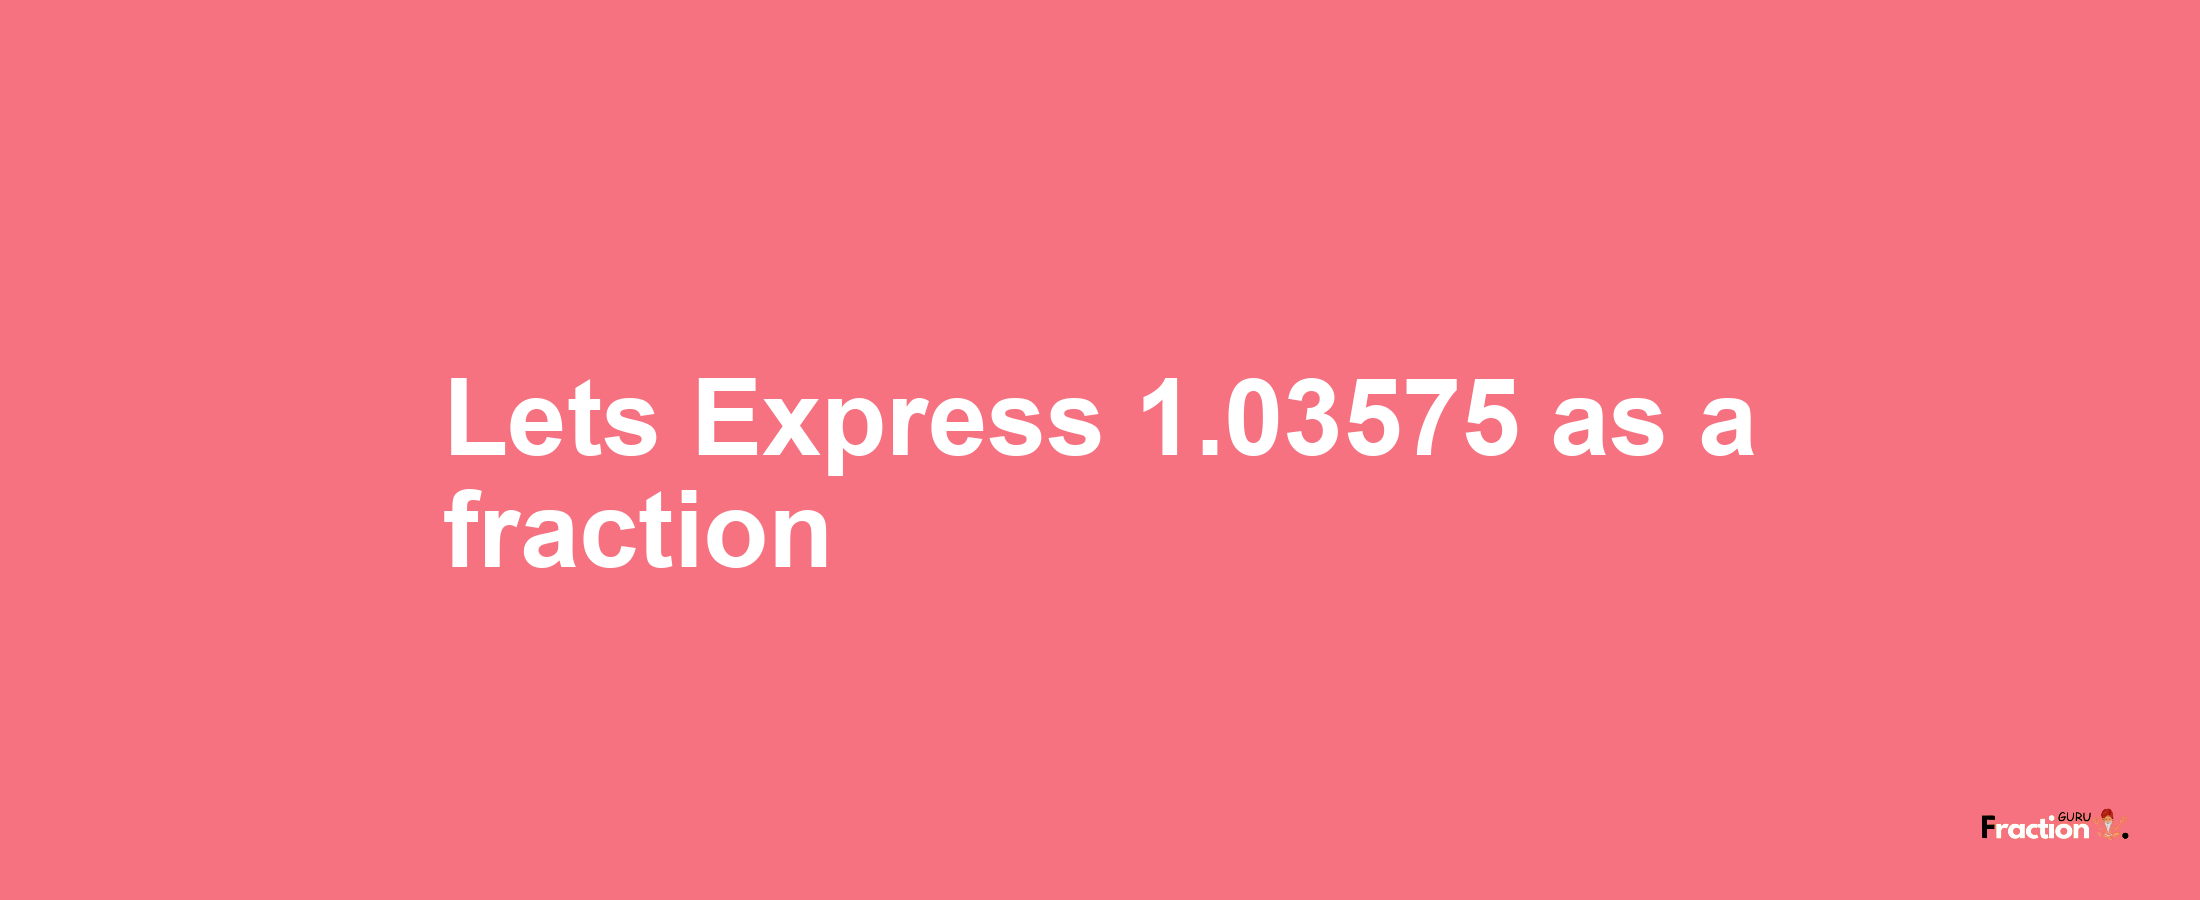 Lets Express 1.03575 as afraction